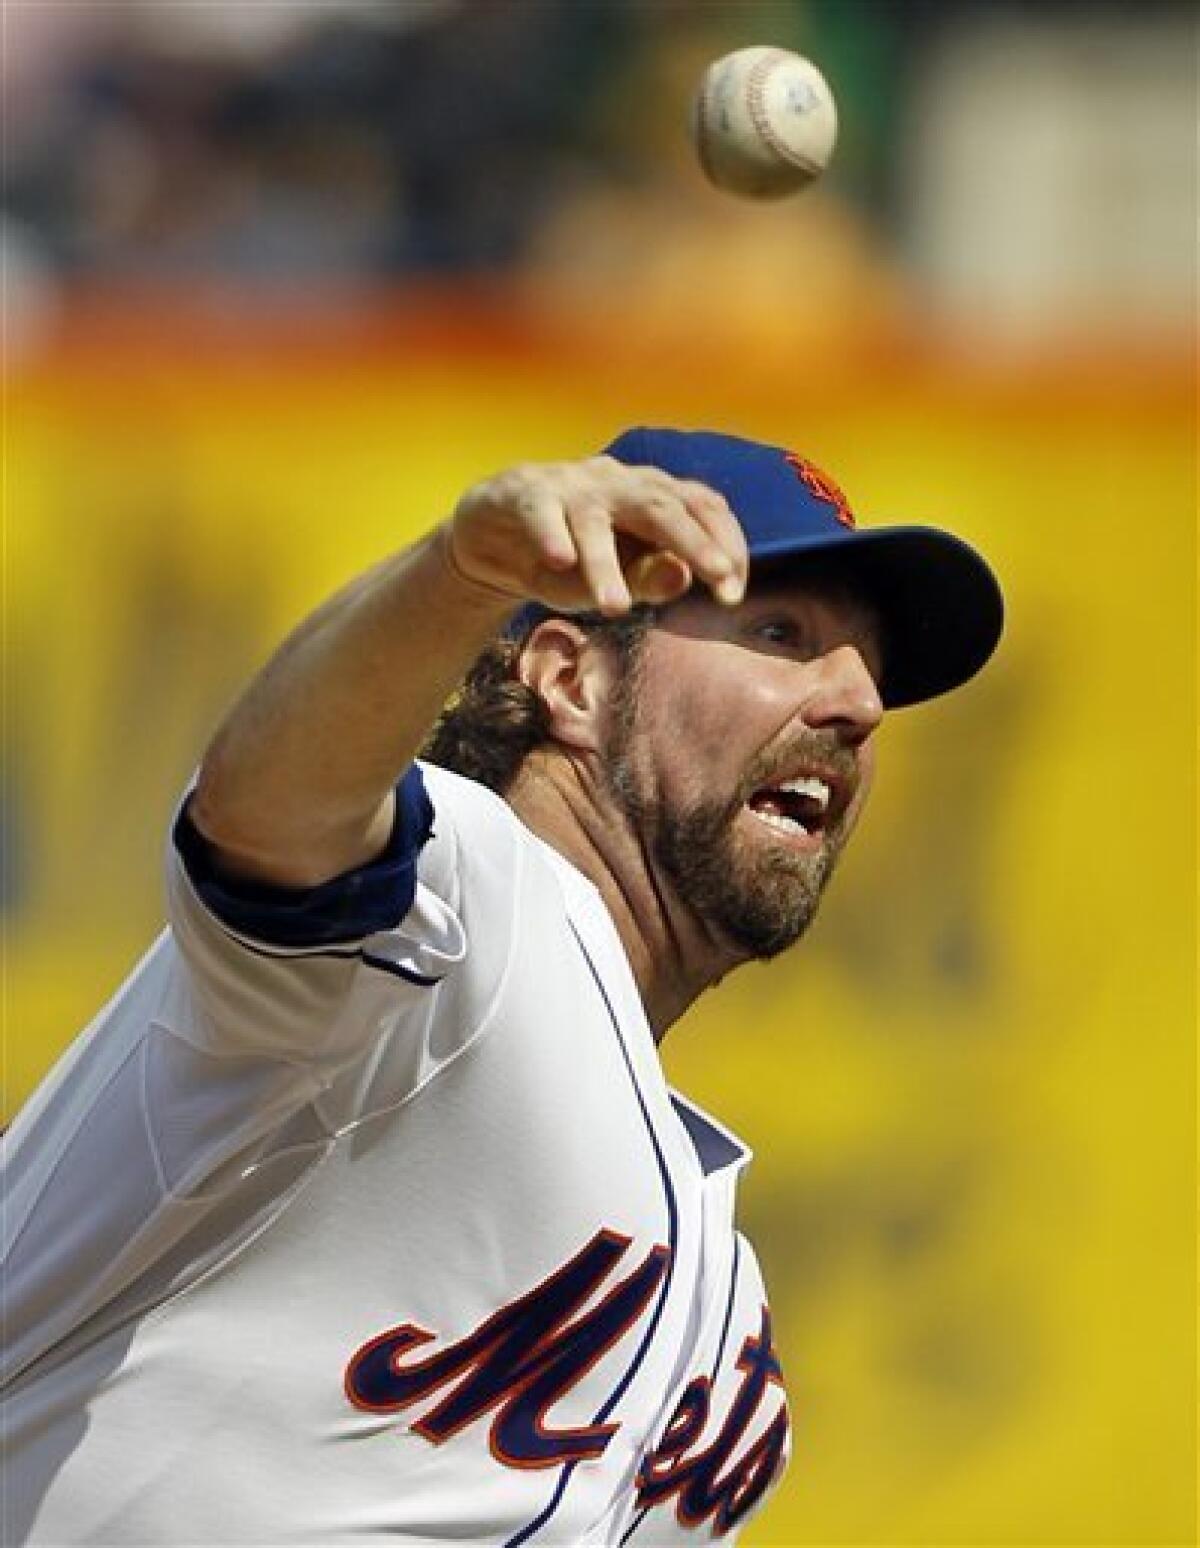 Dickey tweets his own deal: Mets trade him to Jays - The San Diego